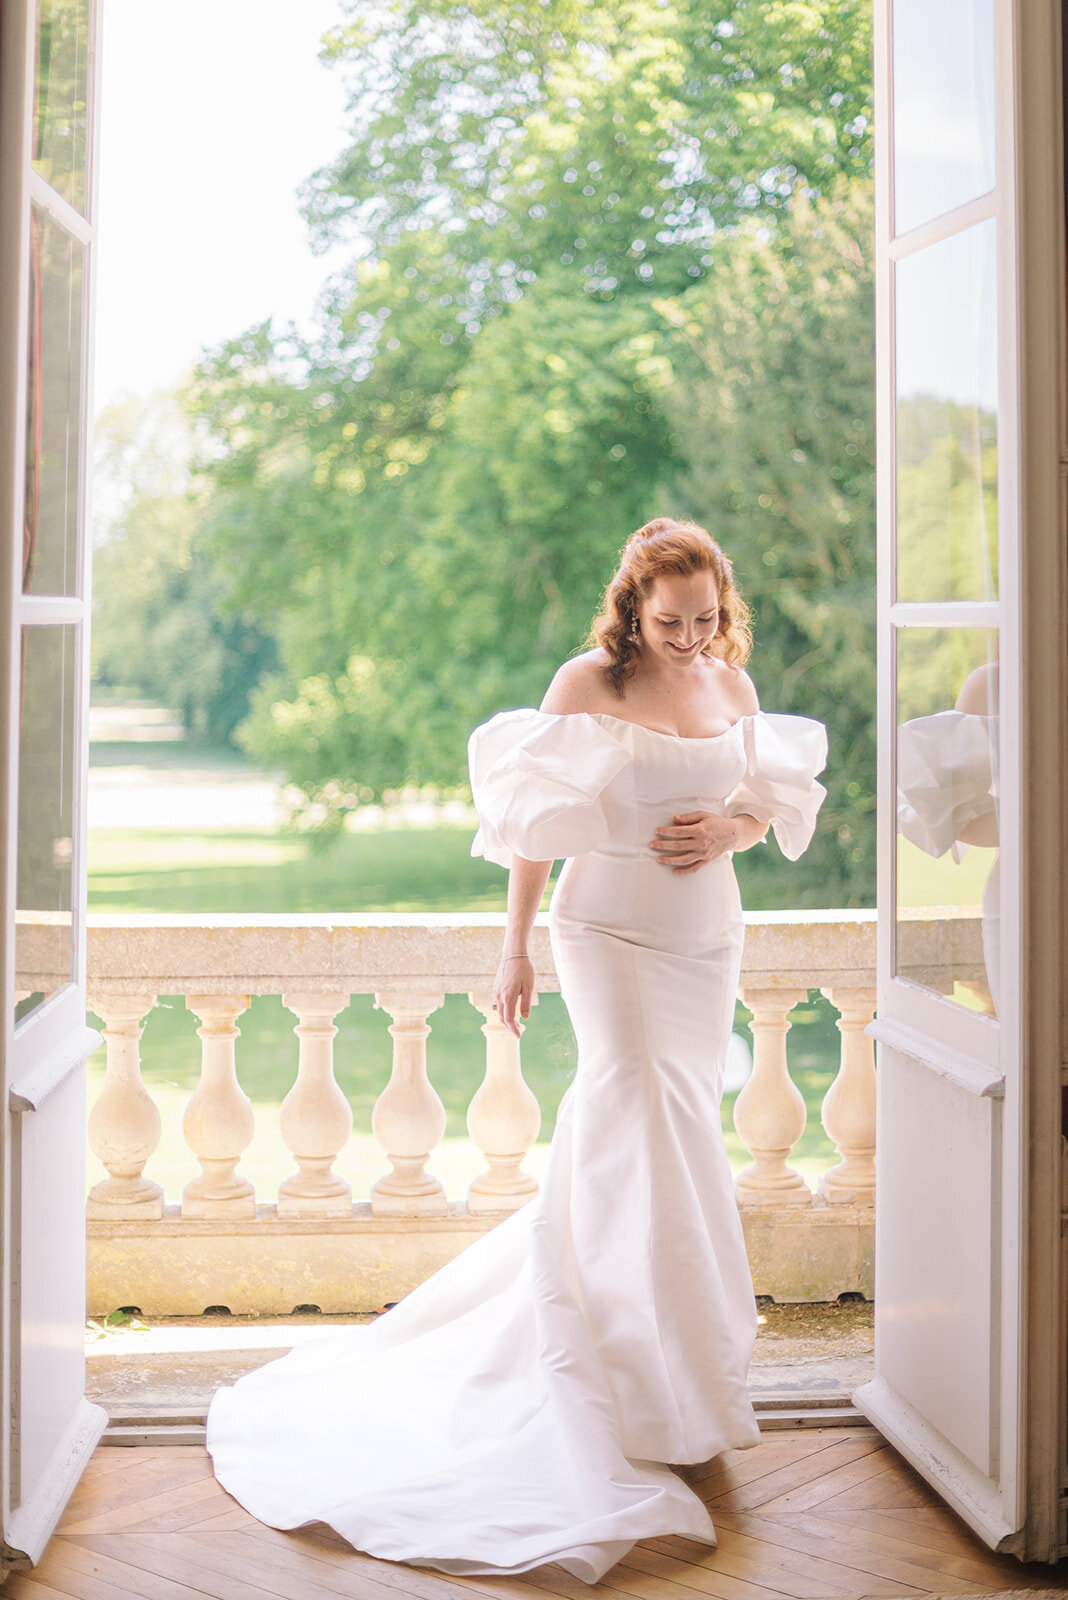 Jennifer Fox Weddings English speaking wedding planning & design agency in France crafting refined and bespoke weddings and celebrations Provence, Paris and destination A&T's Wedding - Harriette Earnshaw Photography-126